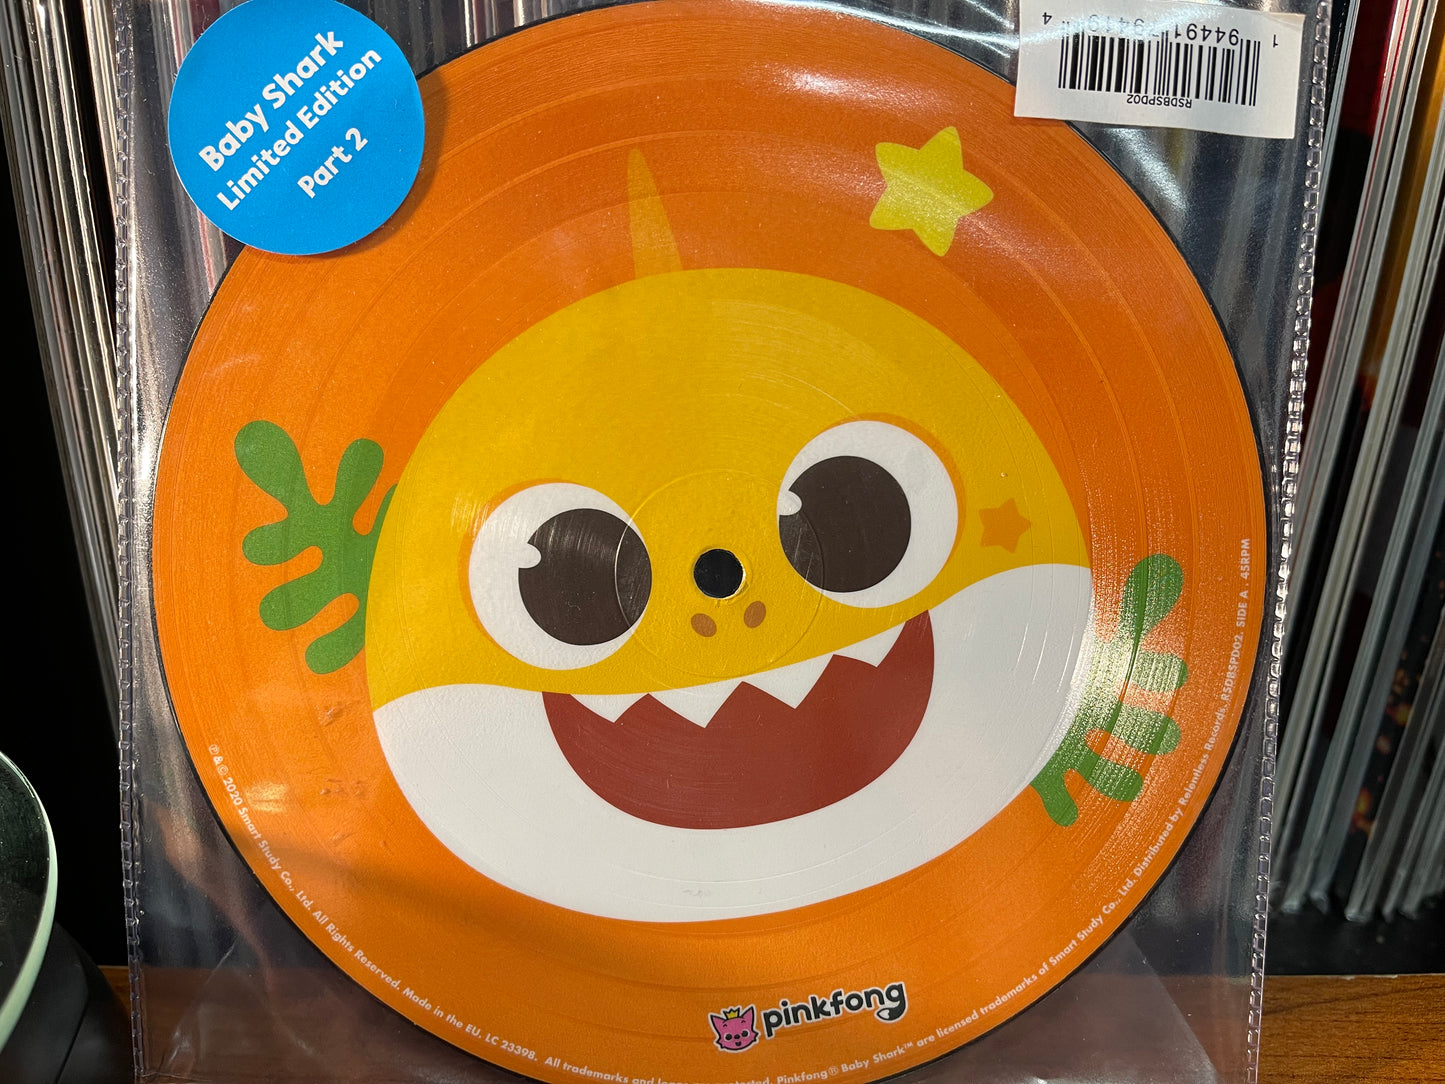 Pinkfong - Baby Shark p2 (RSD 7” Exclusive)